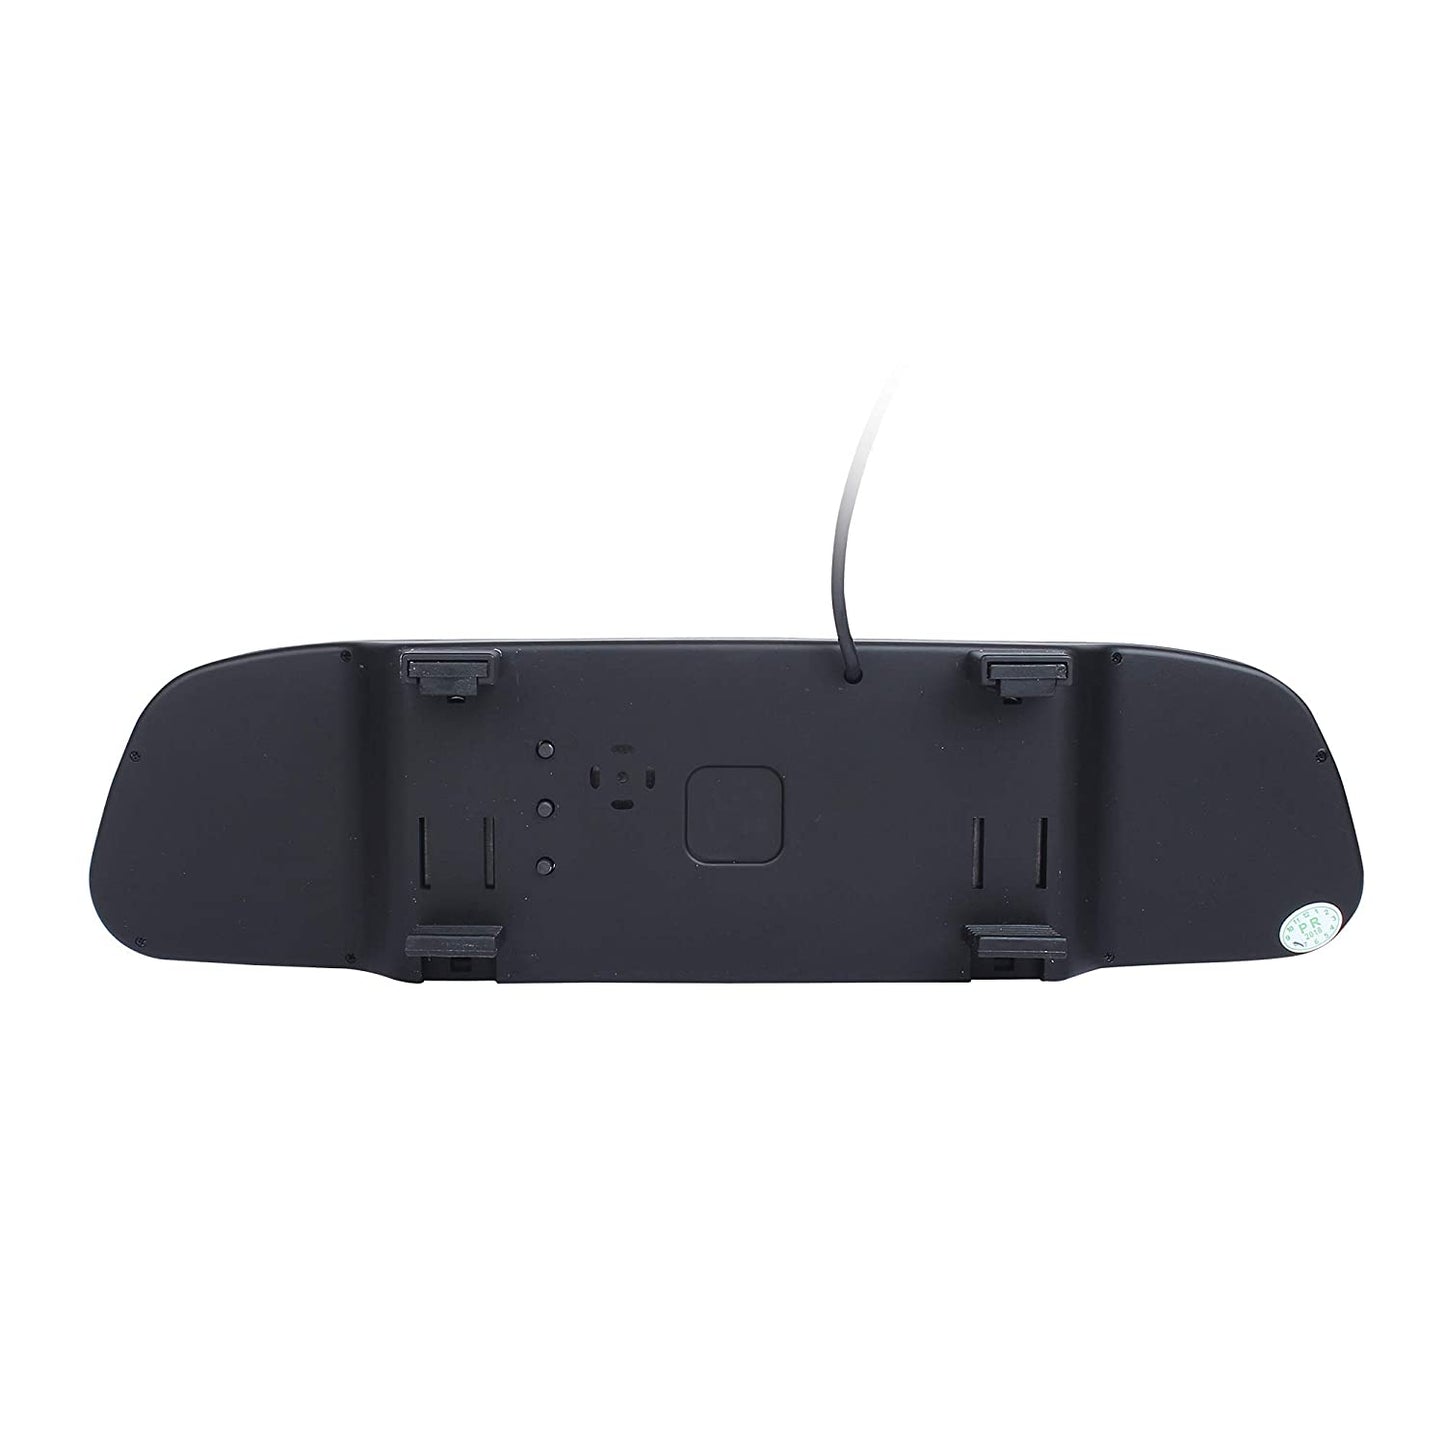 Nippon RPAS- 600 Rear View Mirror with LED-Night Vision Camera